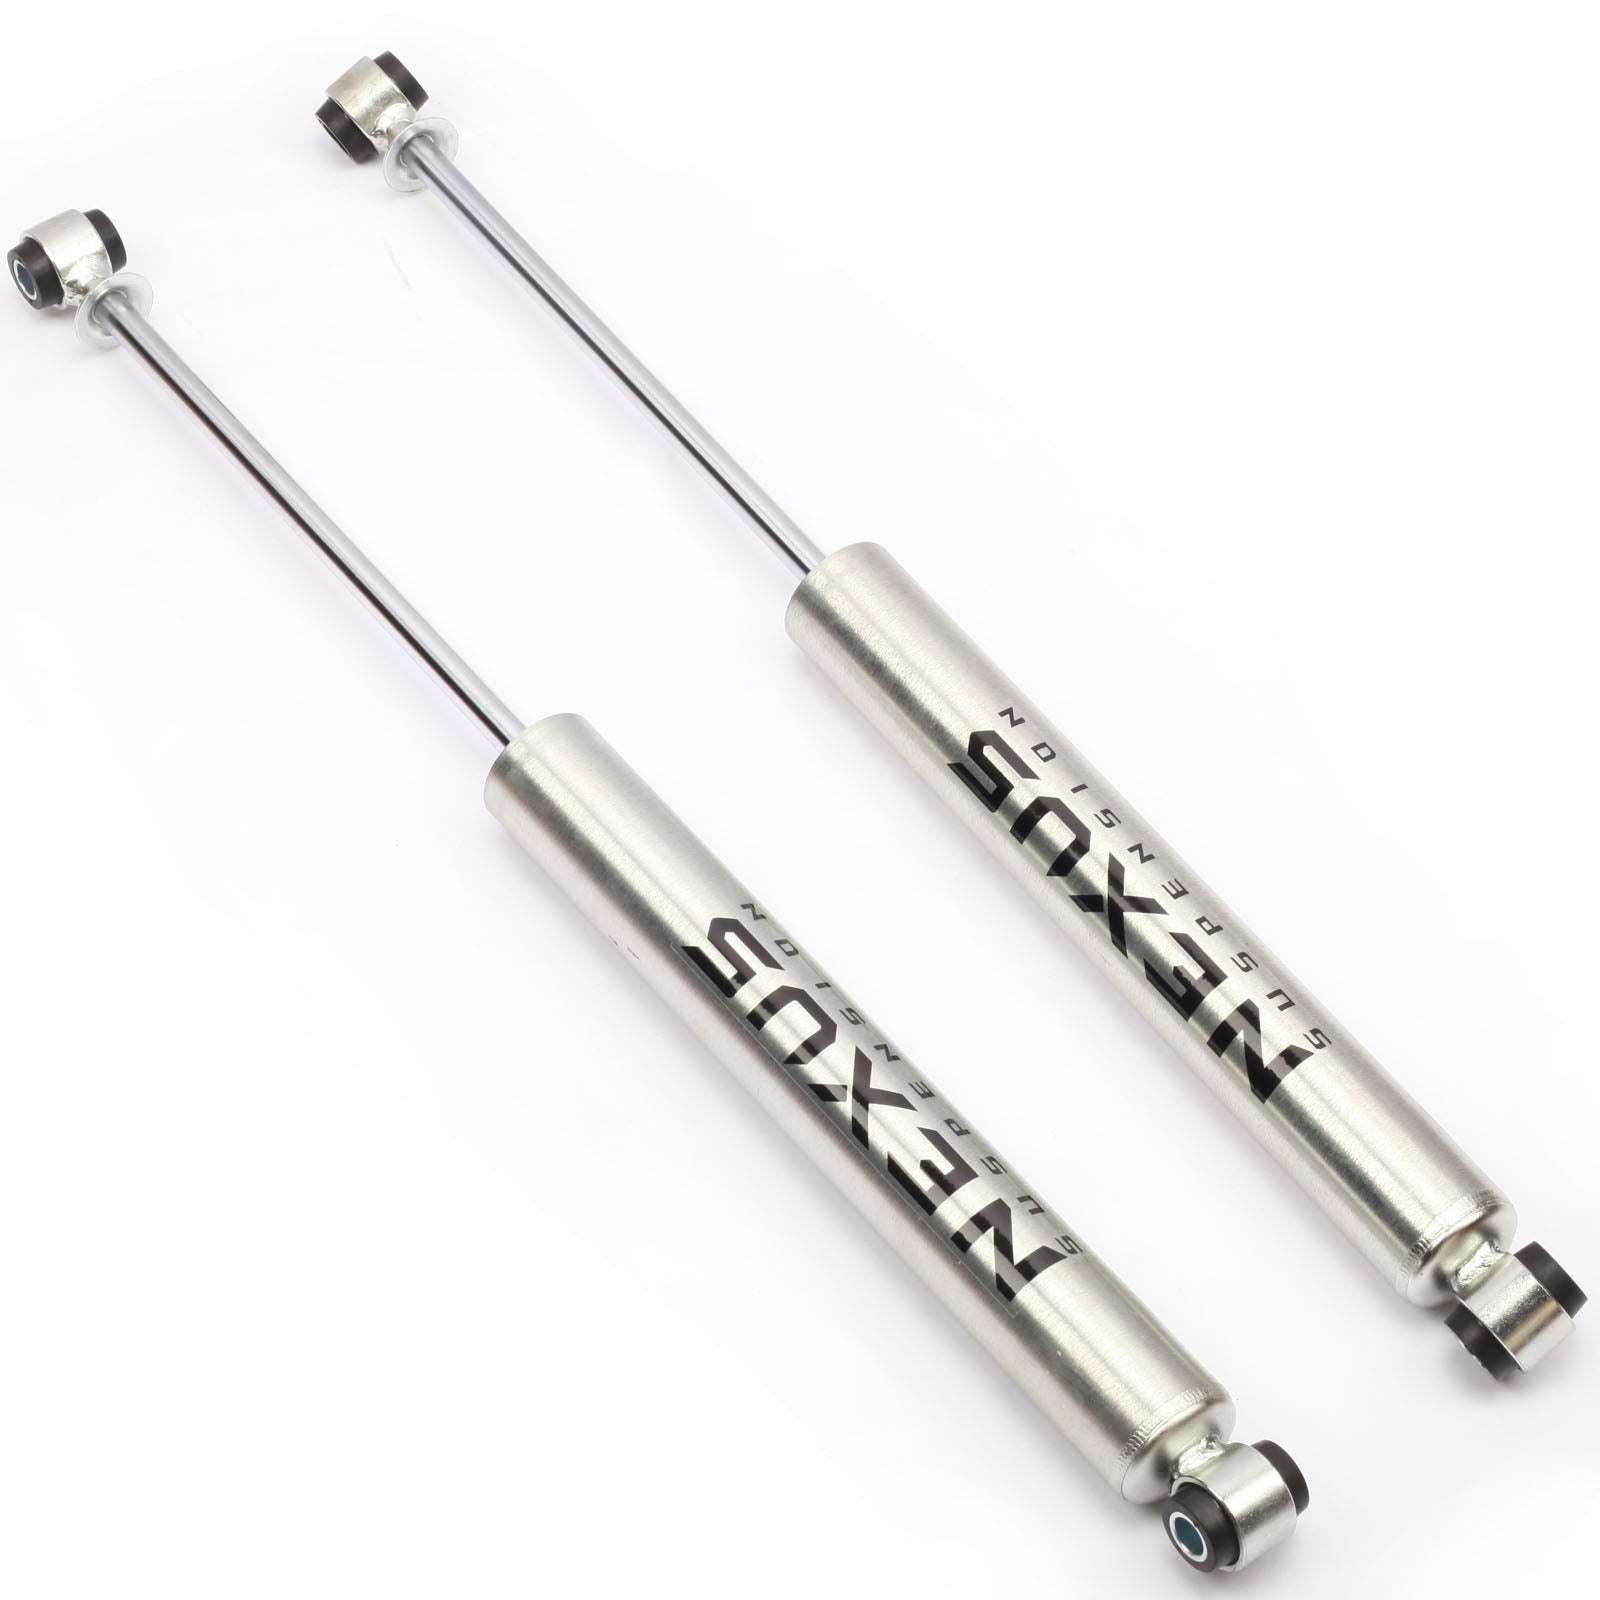 NEXUS SUSPENSION 6Inch Lift Rear Shock Absorber for 2000-2012 Chevrolet Tahoe 4WD,Zinc Plated Coating,Pair Pack